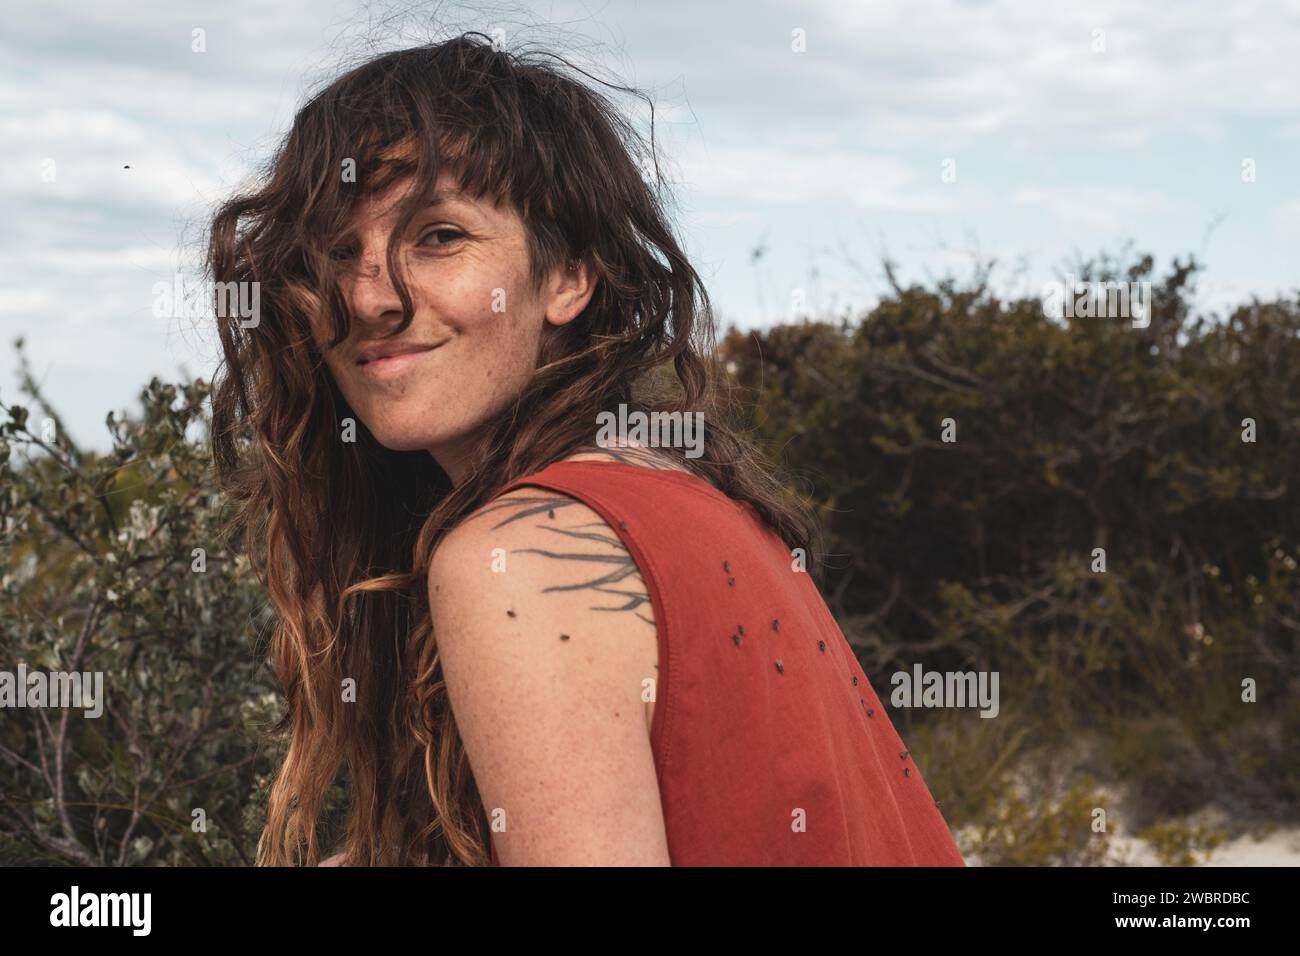 portrait of happy woman on hike with flies smiling Stock Photo